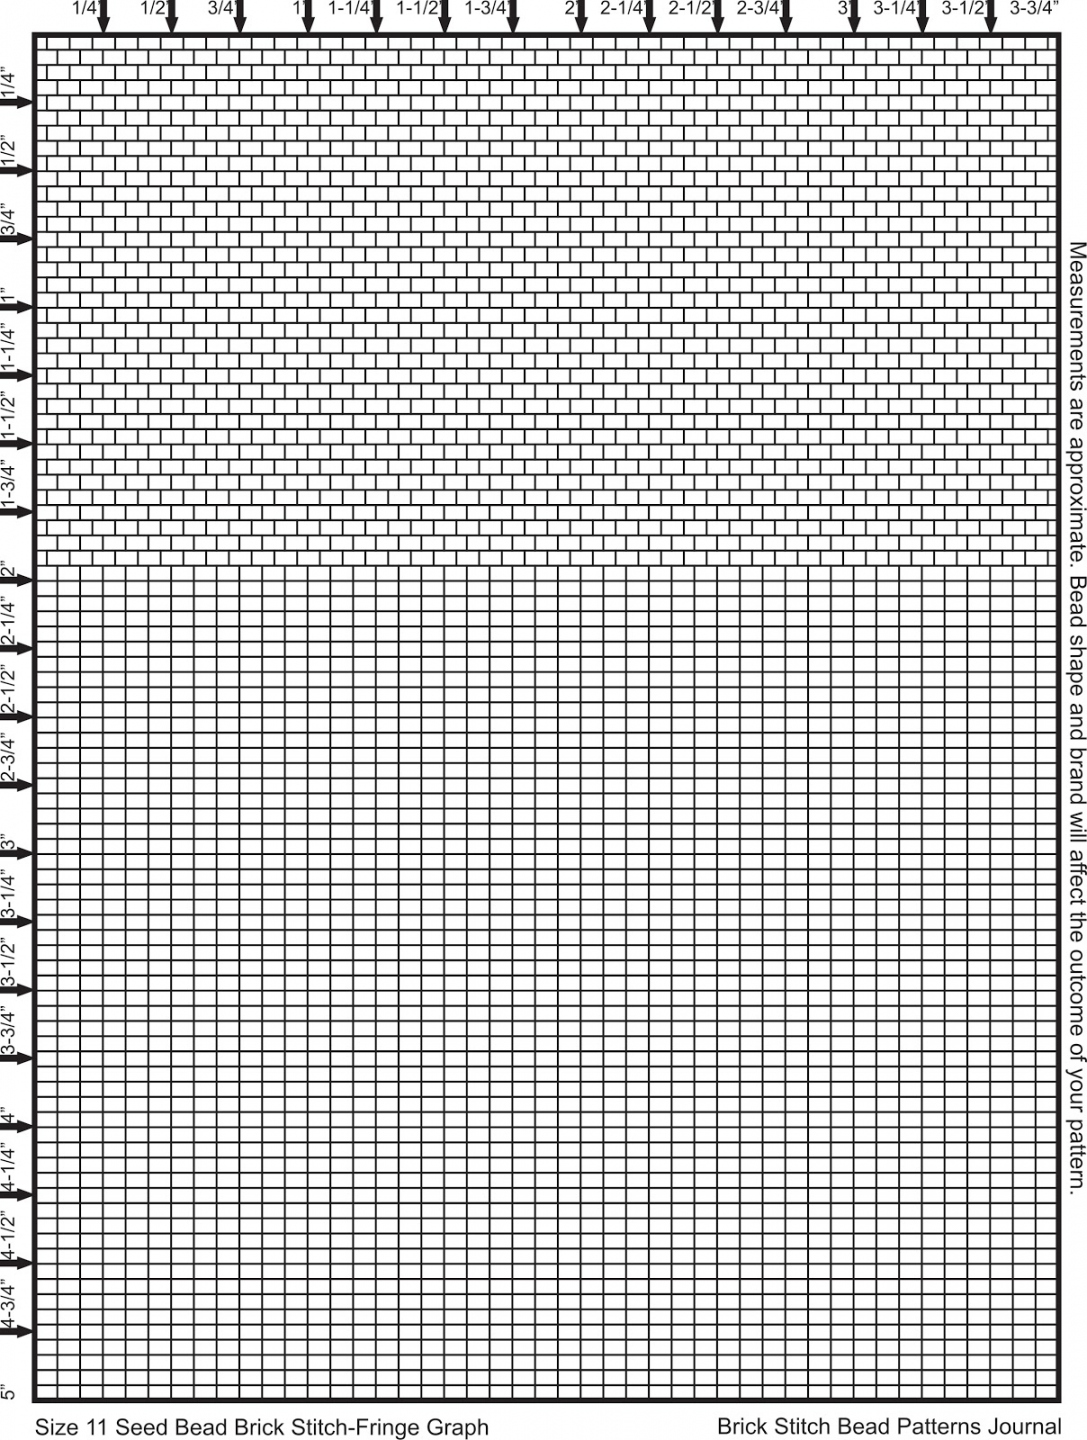 Brick Stitch Bead Patterns Journal: Size  Seed Bead Graph Paper  - FREE Printables - Free Printable Brick Stitch Earring Graph Paper